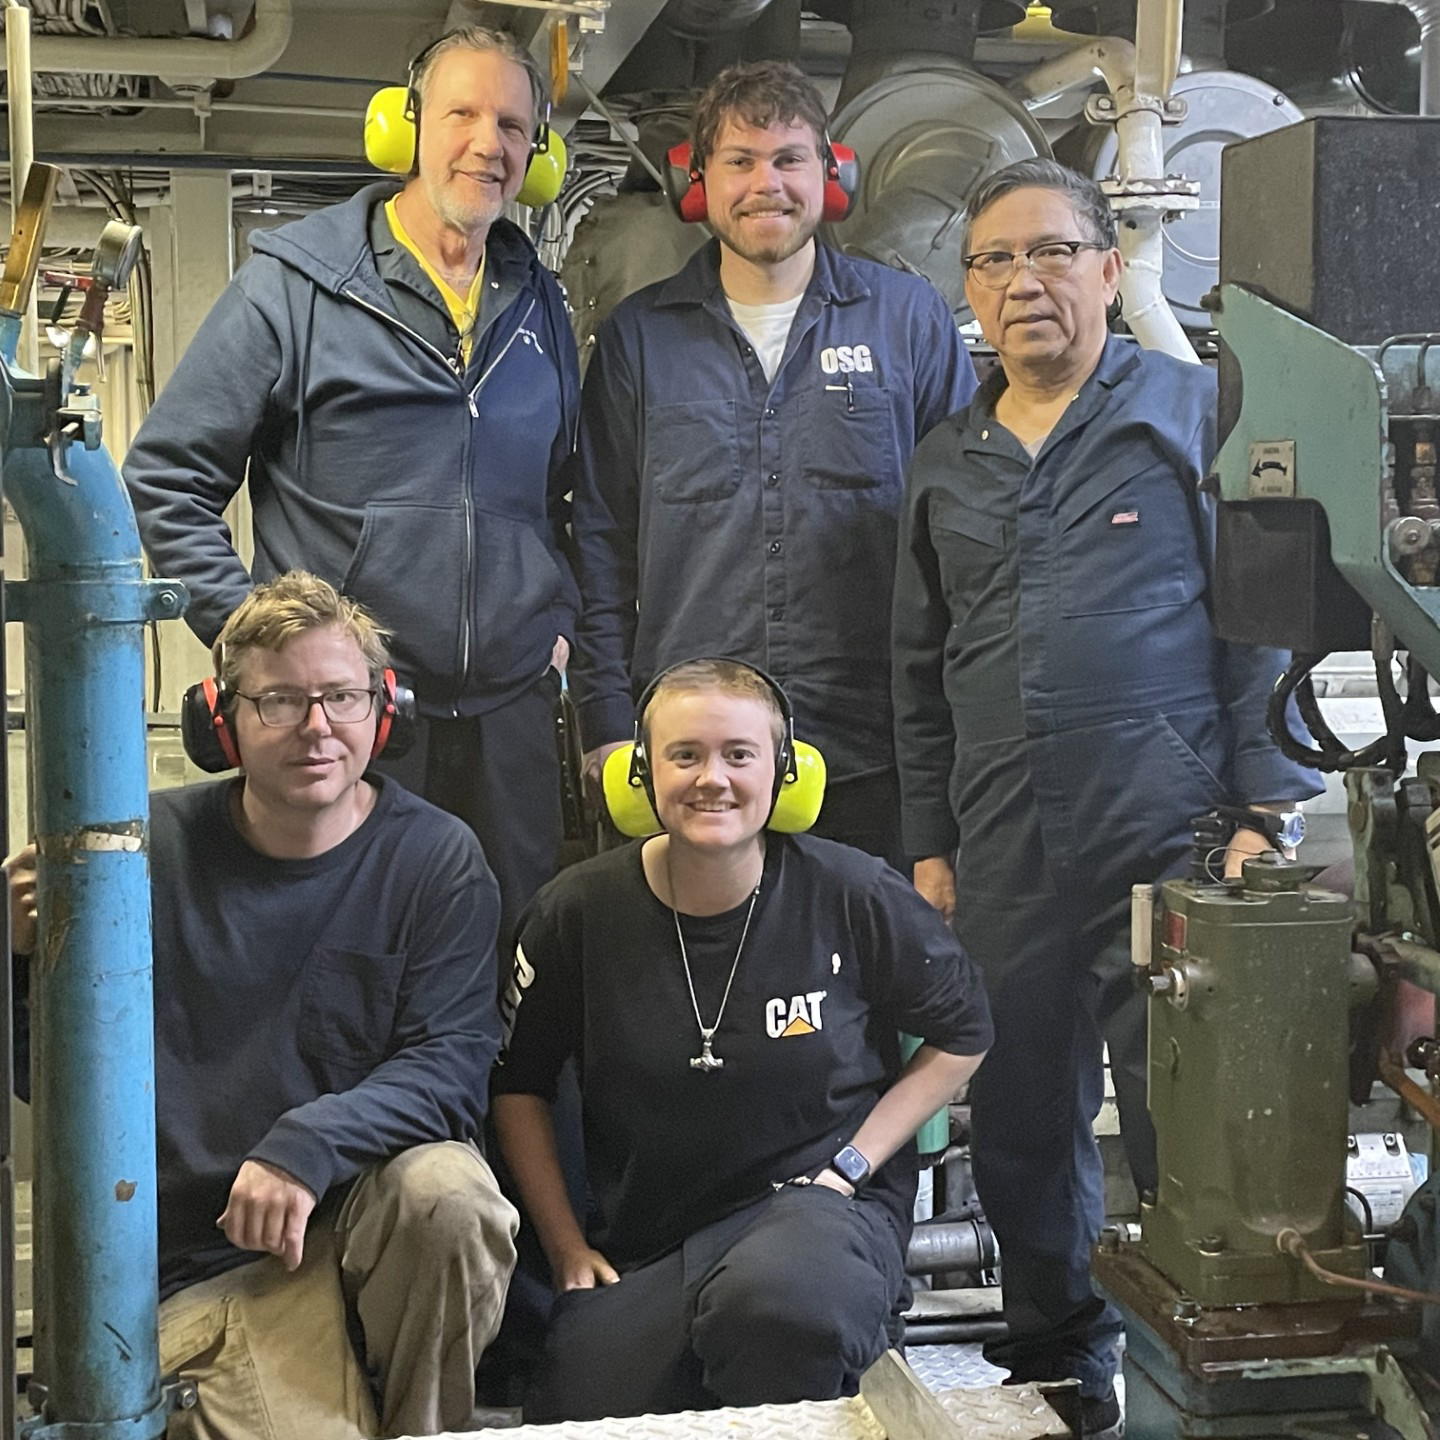 Some members of the Engine Room Team. Top row, from left to right: Mac Baker, Oiler; Mitchell Paul, Third Engineer (3A/E); and Rudy Florendo, Oiler. Bottom row, from left to right: Sean Sullivan, First Engineer (1A/E); and Sara Wright, Second Engineer (2A/E).